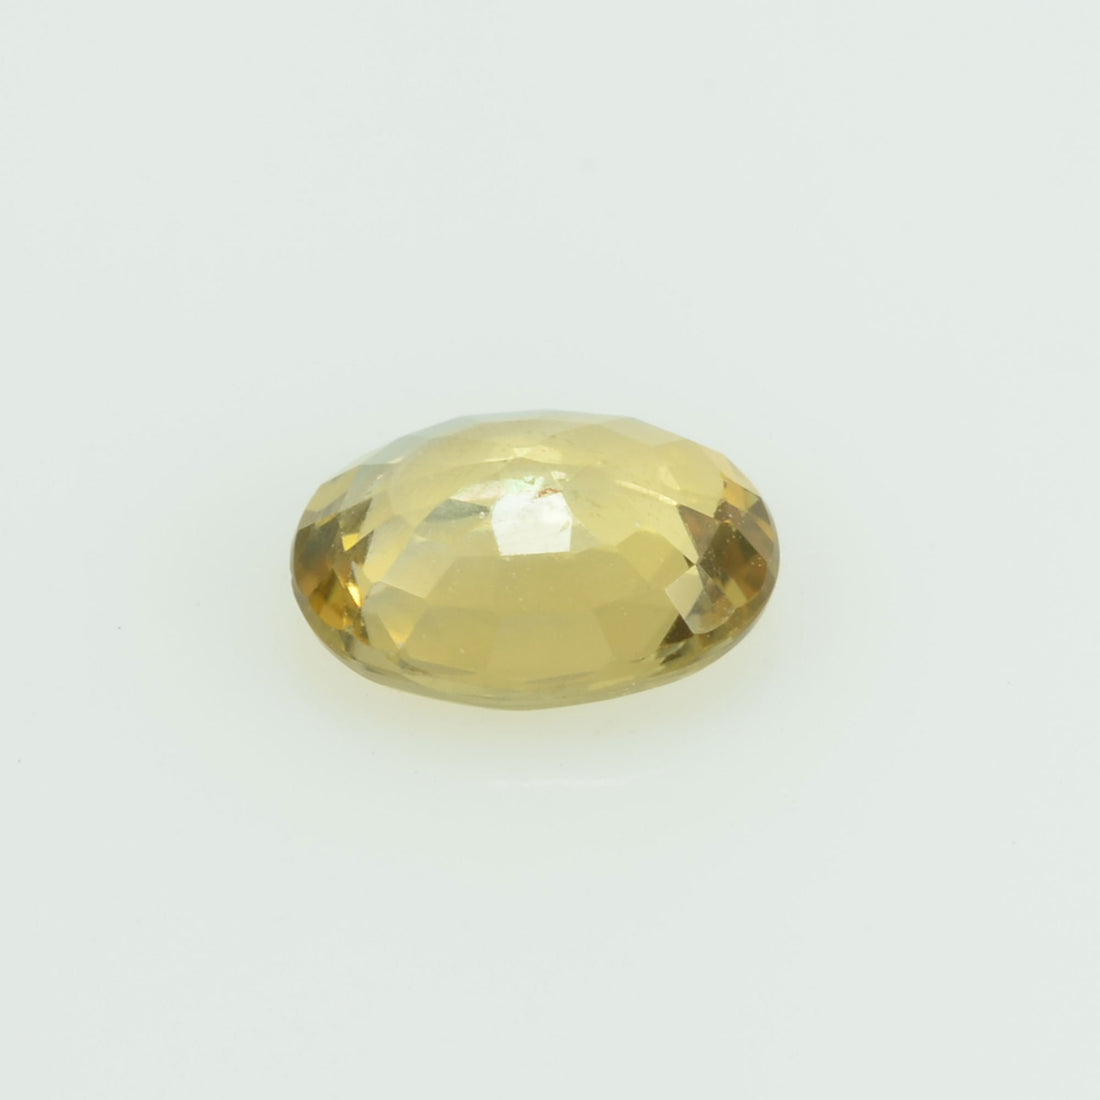 0.64 Cts Natural Yellow Sapphire Loose Gemstone Oval Cut